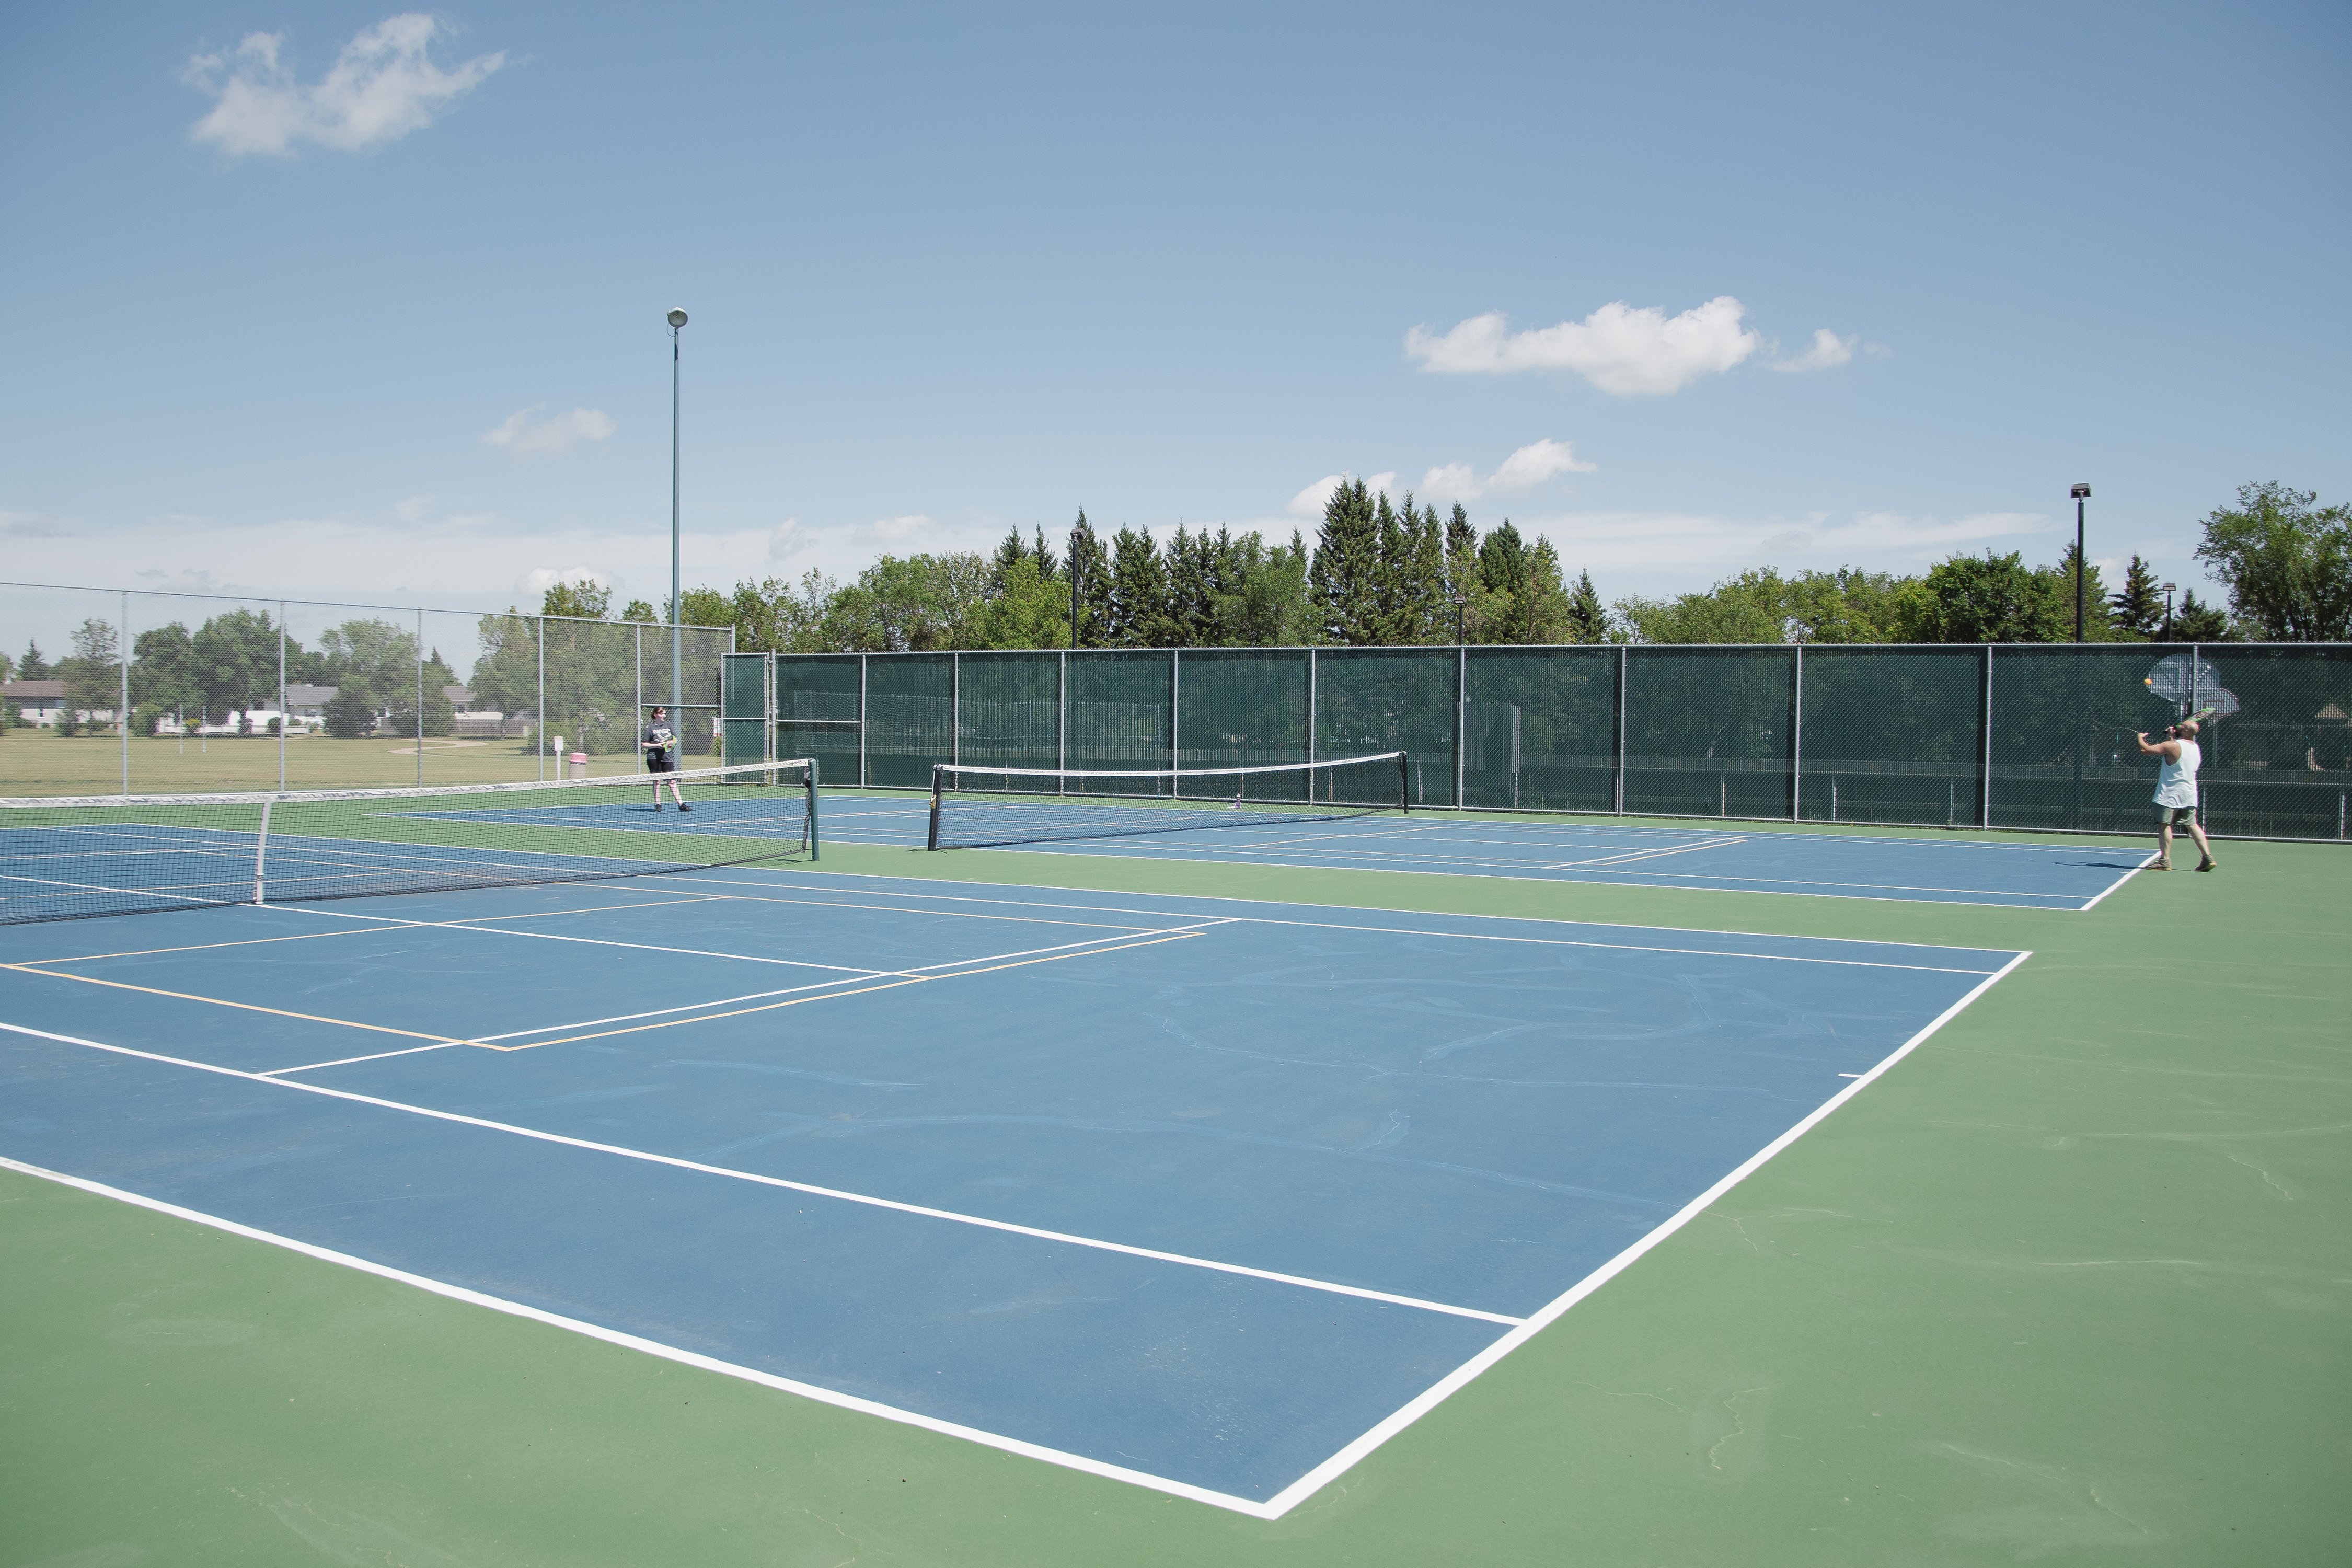 Tennis courts at Heritage Heights Park